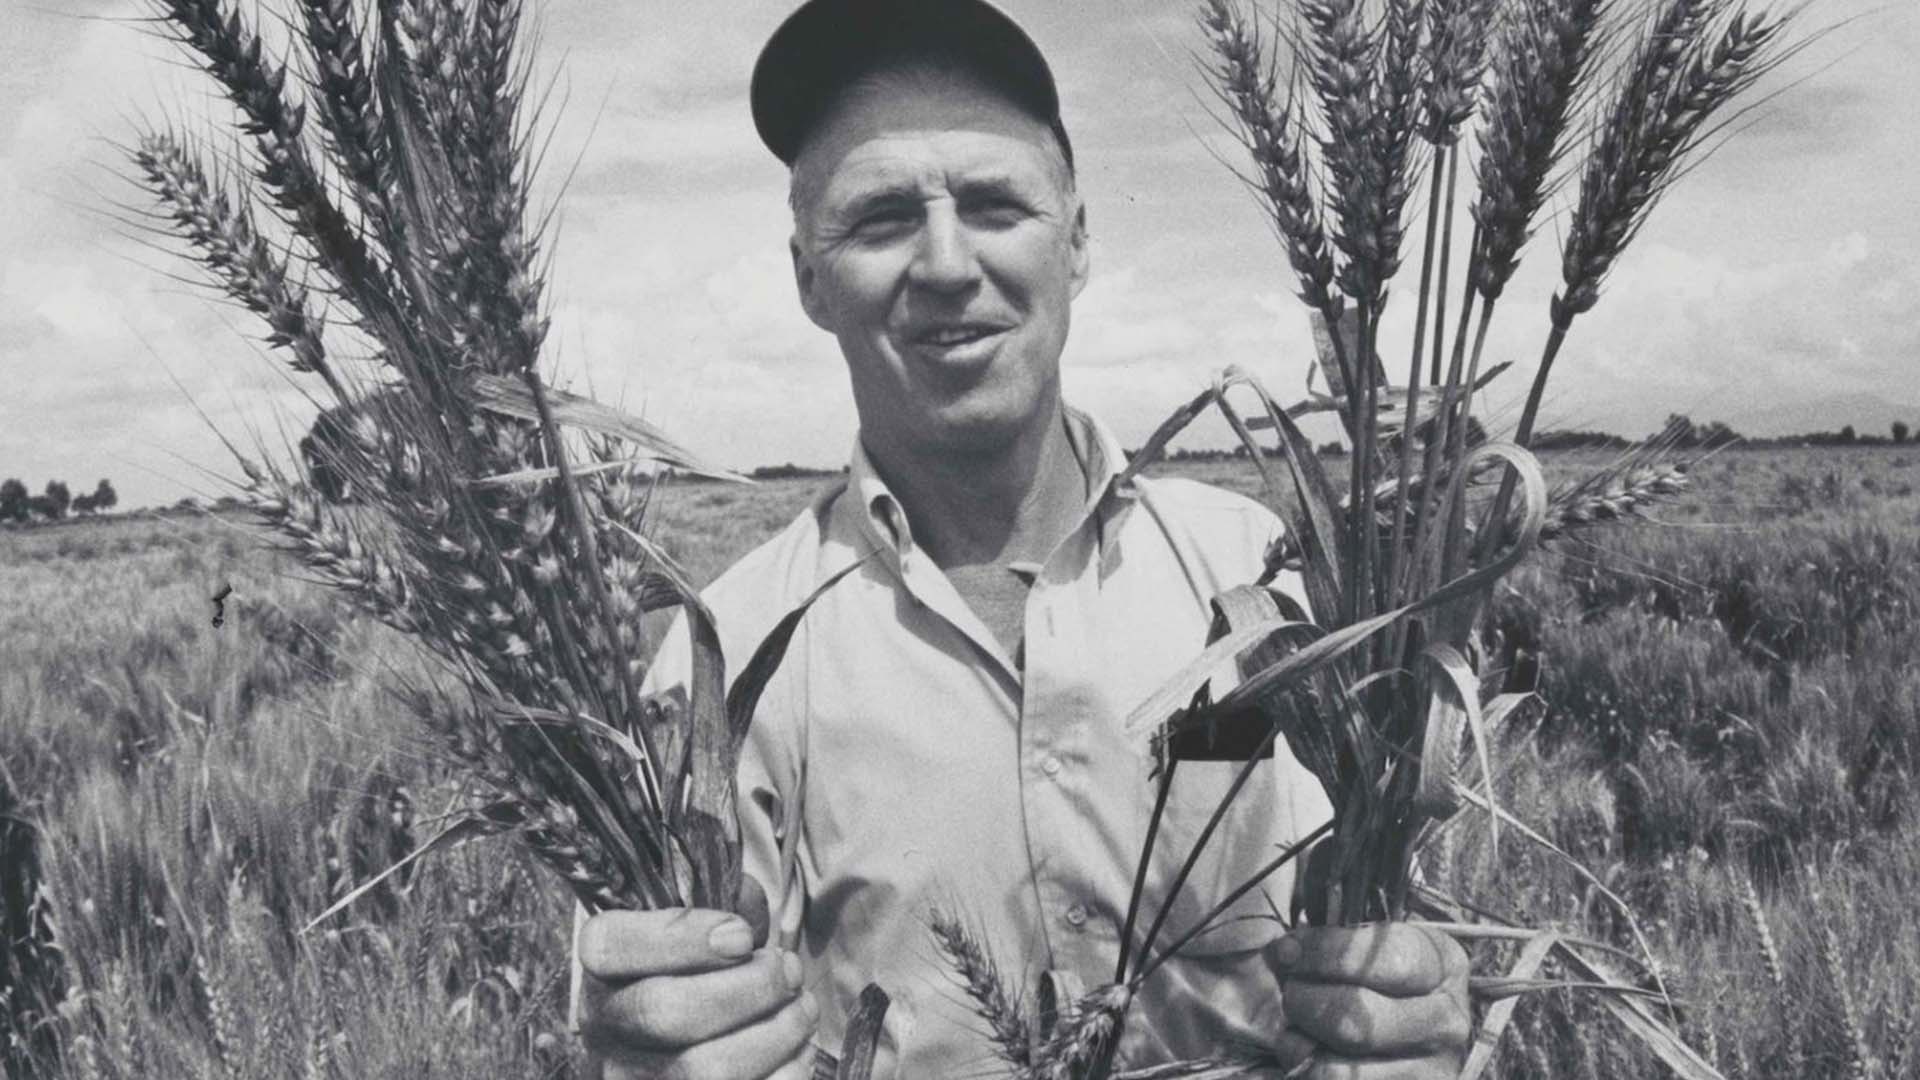 Norman Borlaug in Mexico Photo Credit: National Portrait Gallery